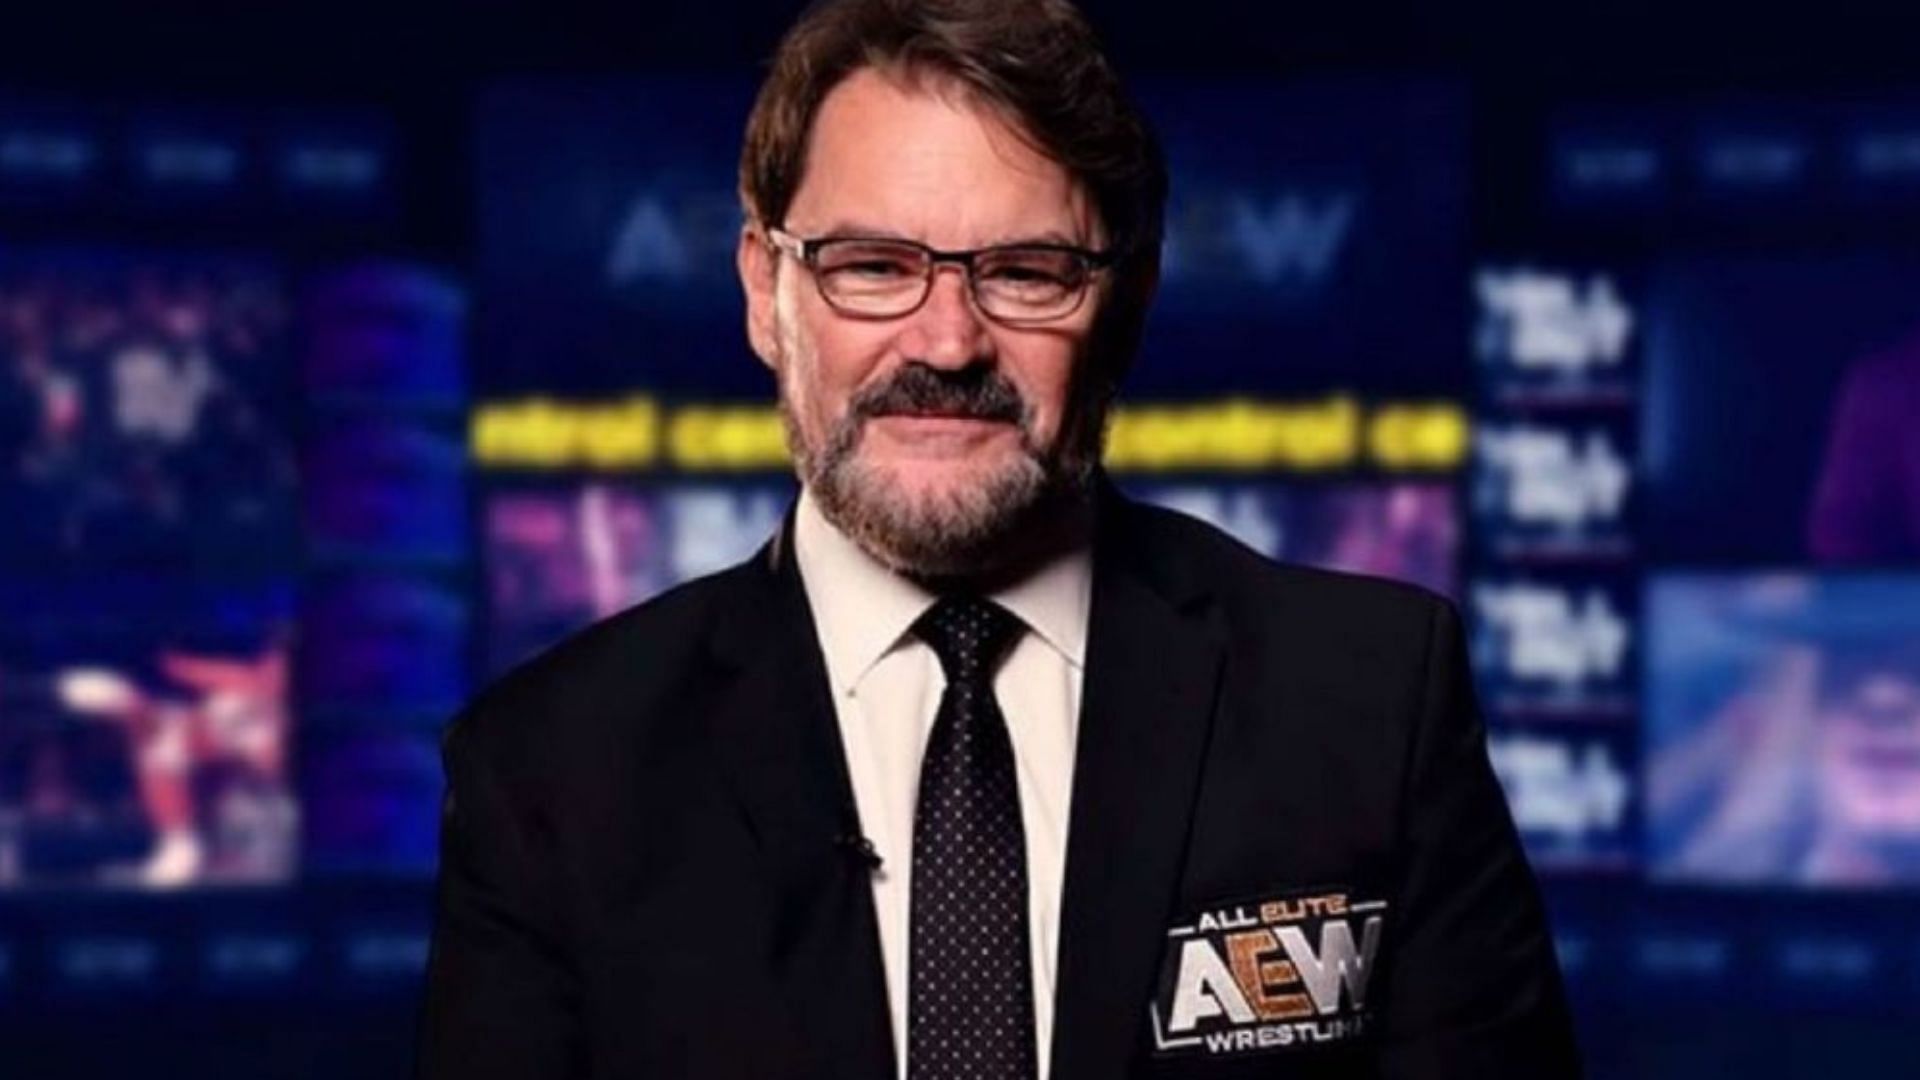 Tony Schiavone is signed to AEW as a commentator and senior producer